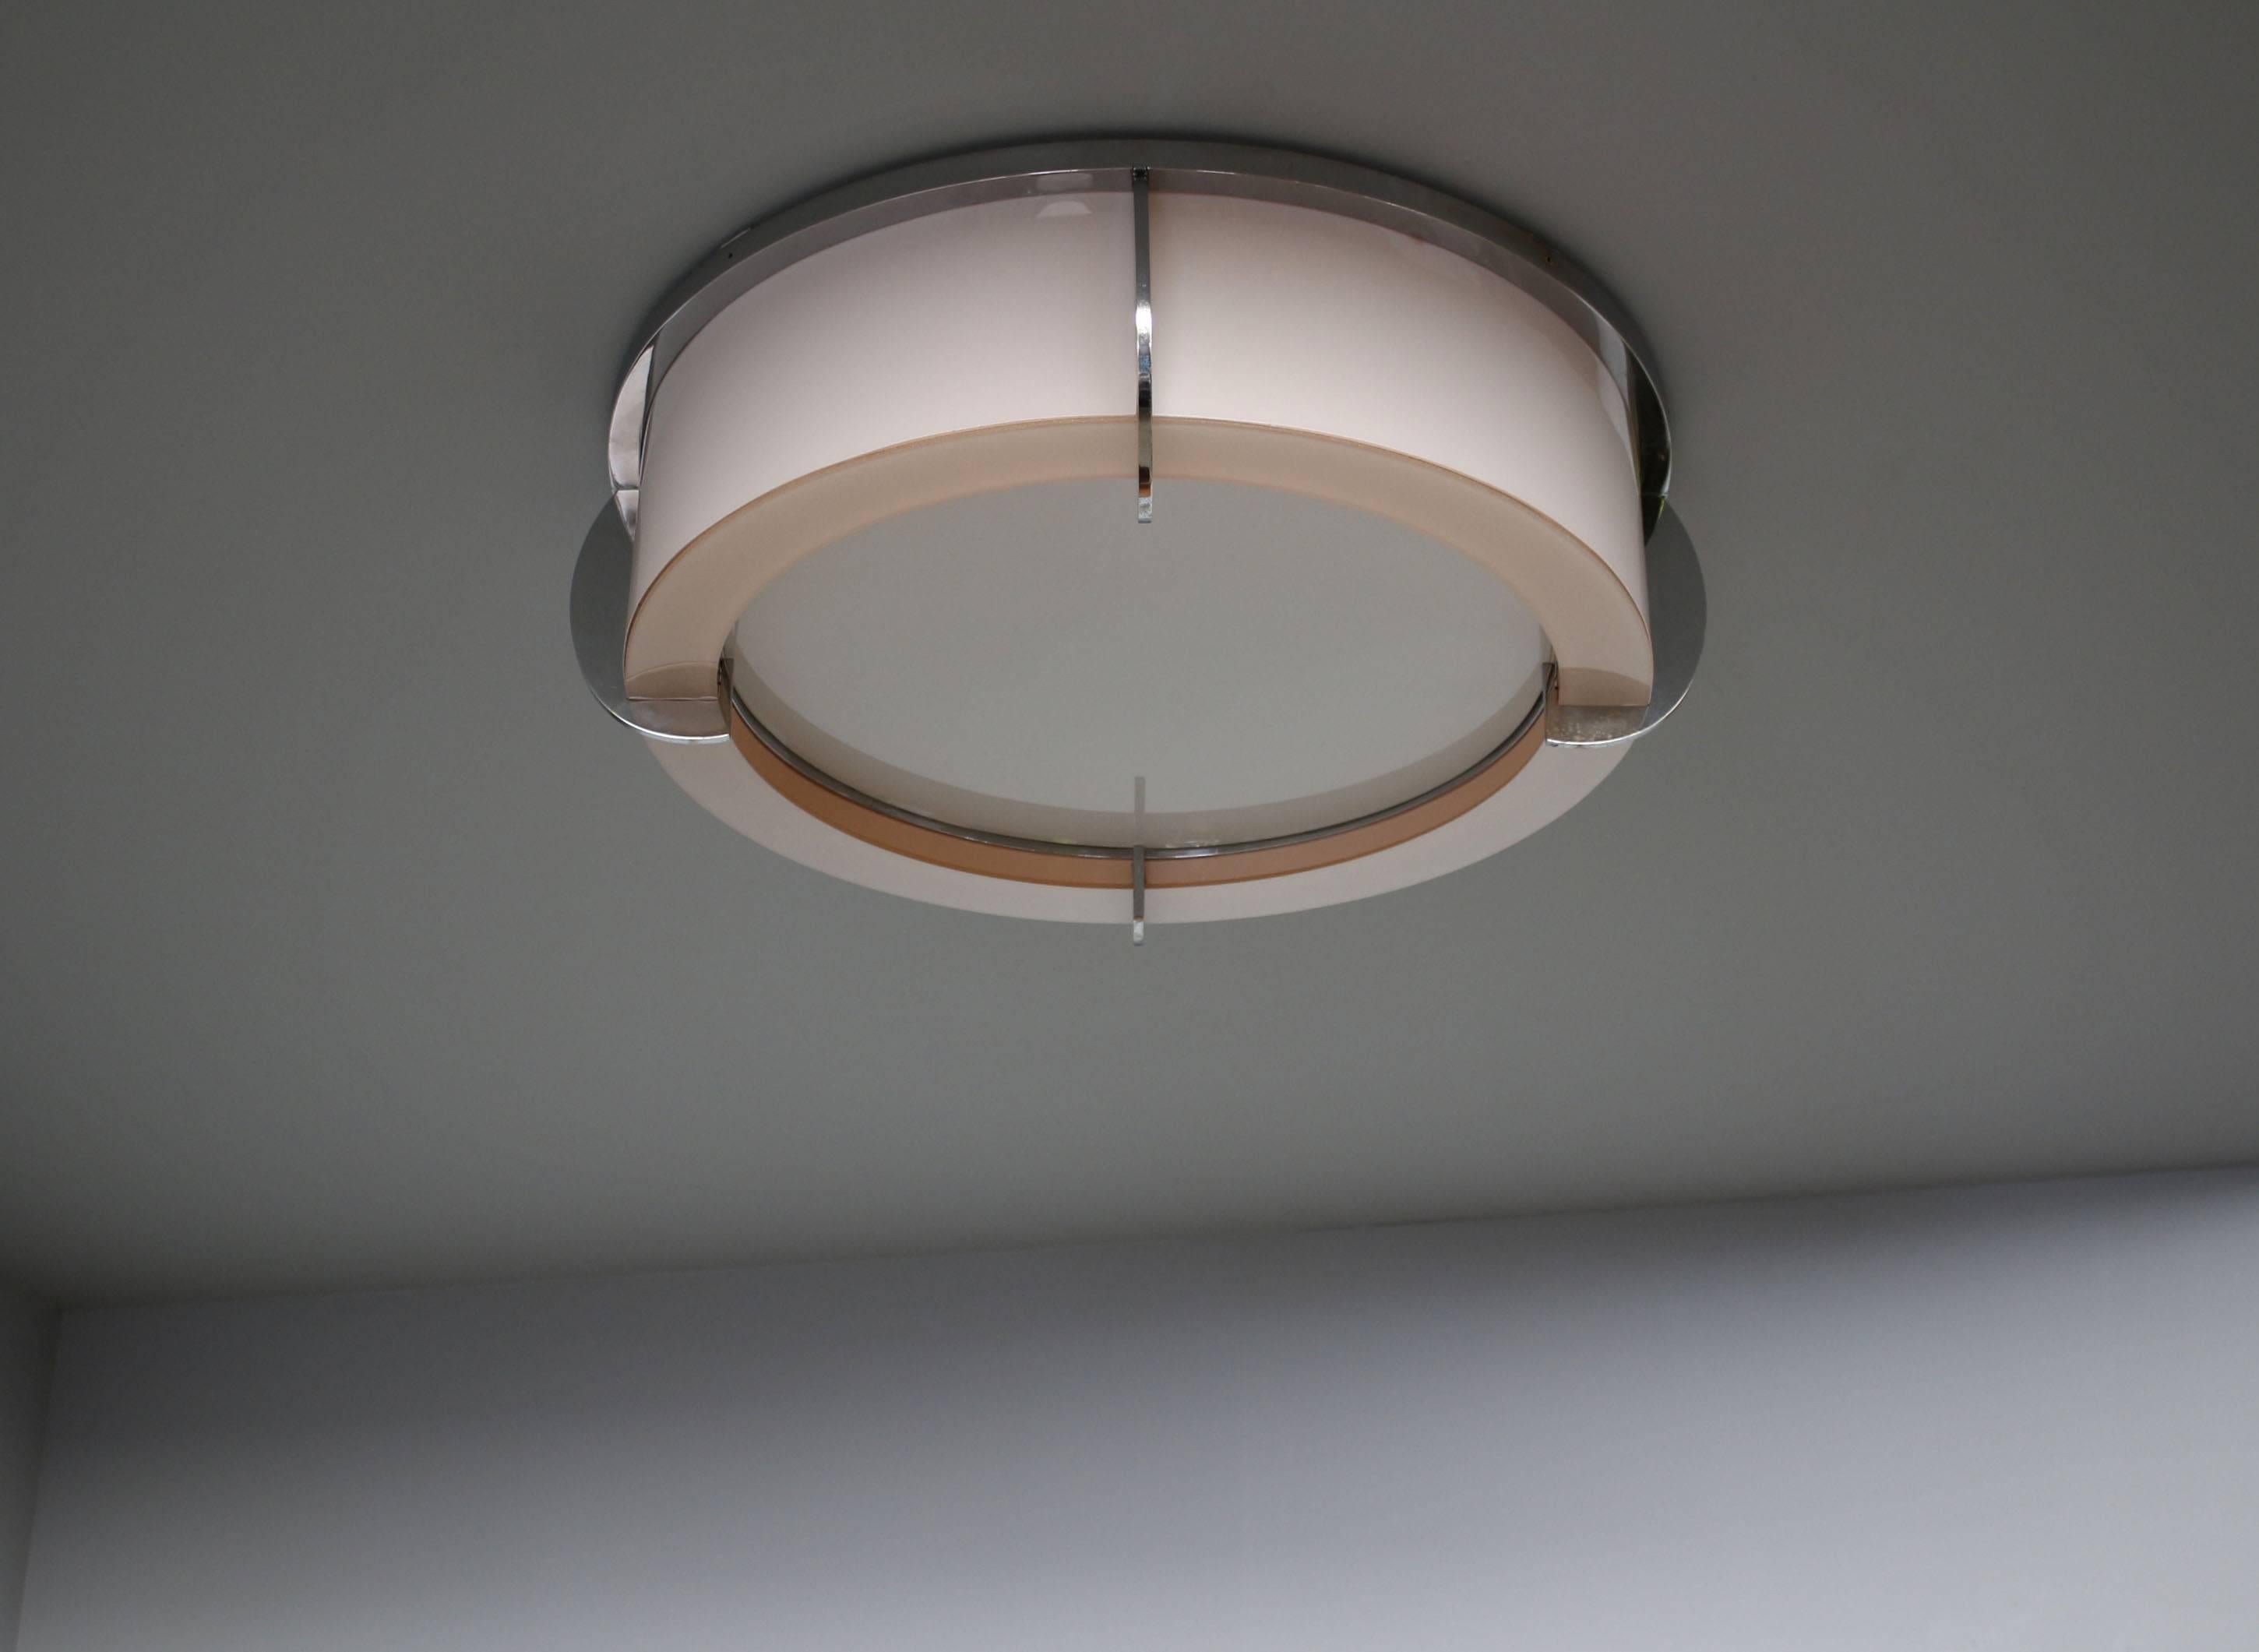 Mounted on chromed crown-shaped frames, the enameled pink and white glass diffusers give off a strong and soft light. The round horizontal diffusers are easily removable in order to change the bulbs.
Diameter at glass parts is 23